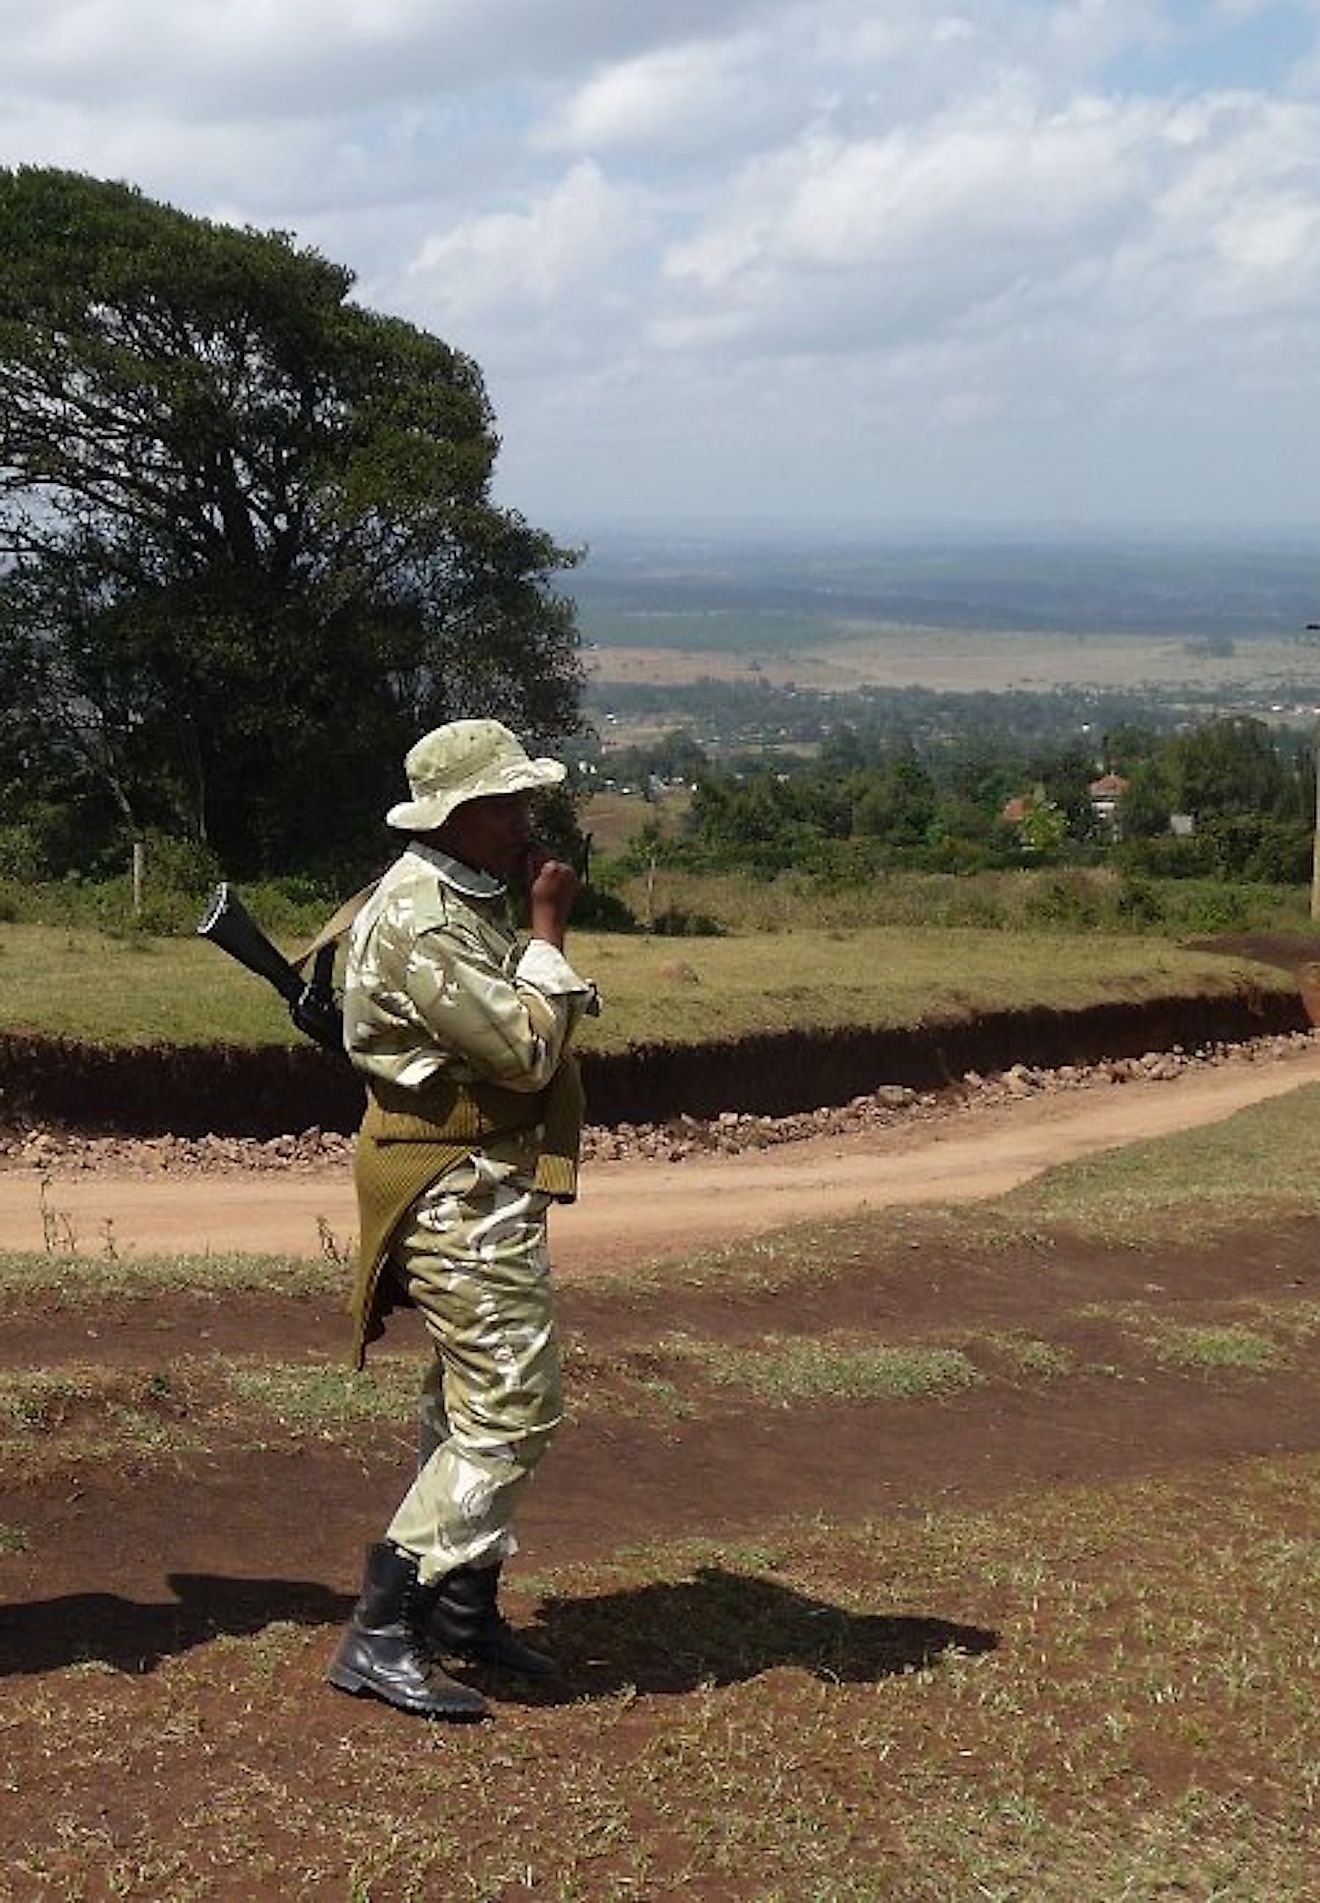 Ranger from the Kenya Wildlife Service, KWS, in Ngong Hills. Image credit: Rotsee2/Wikimedia.org